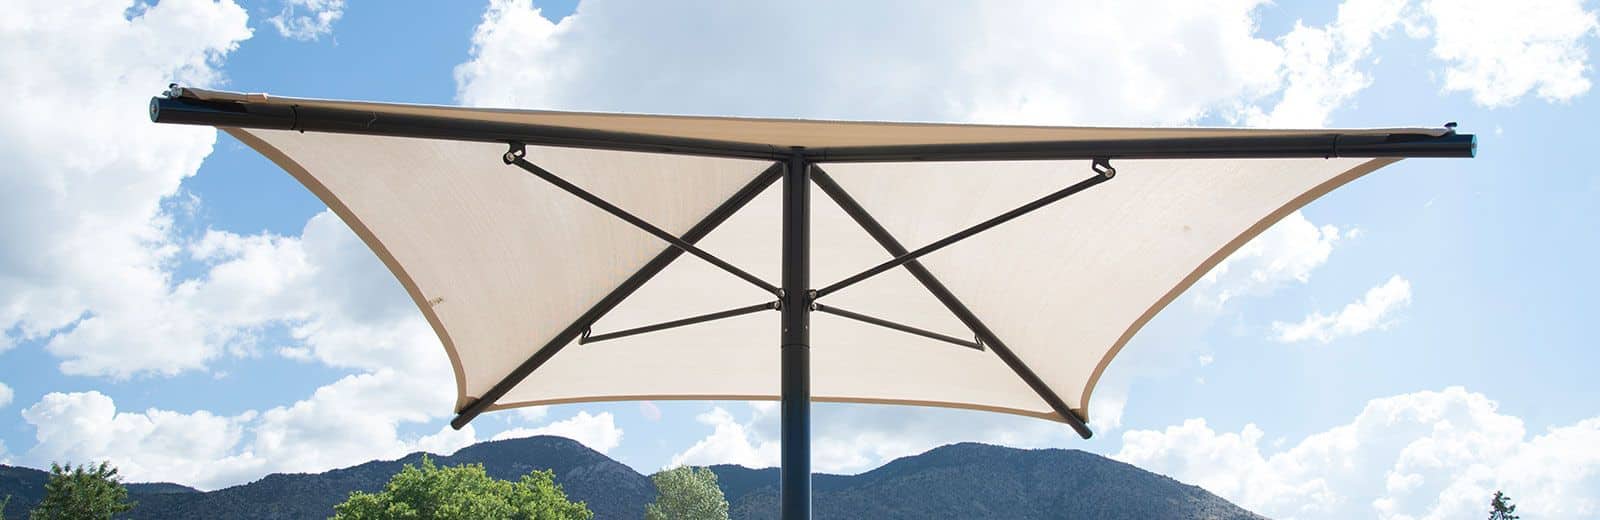 check out this beautiful shade structure